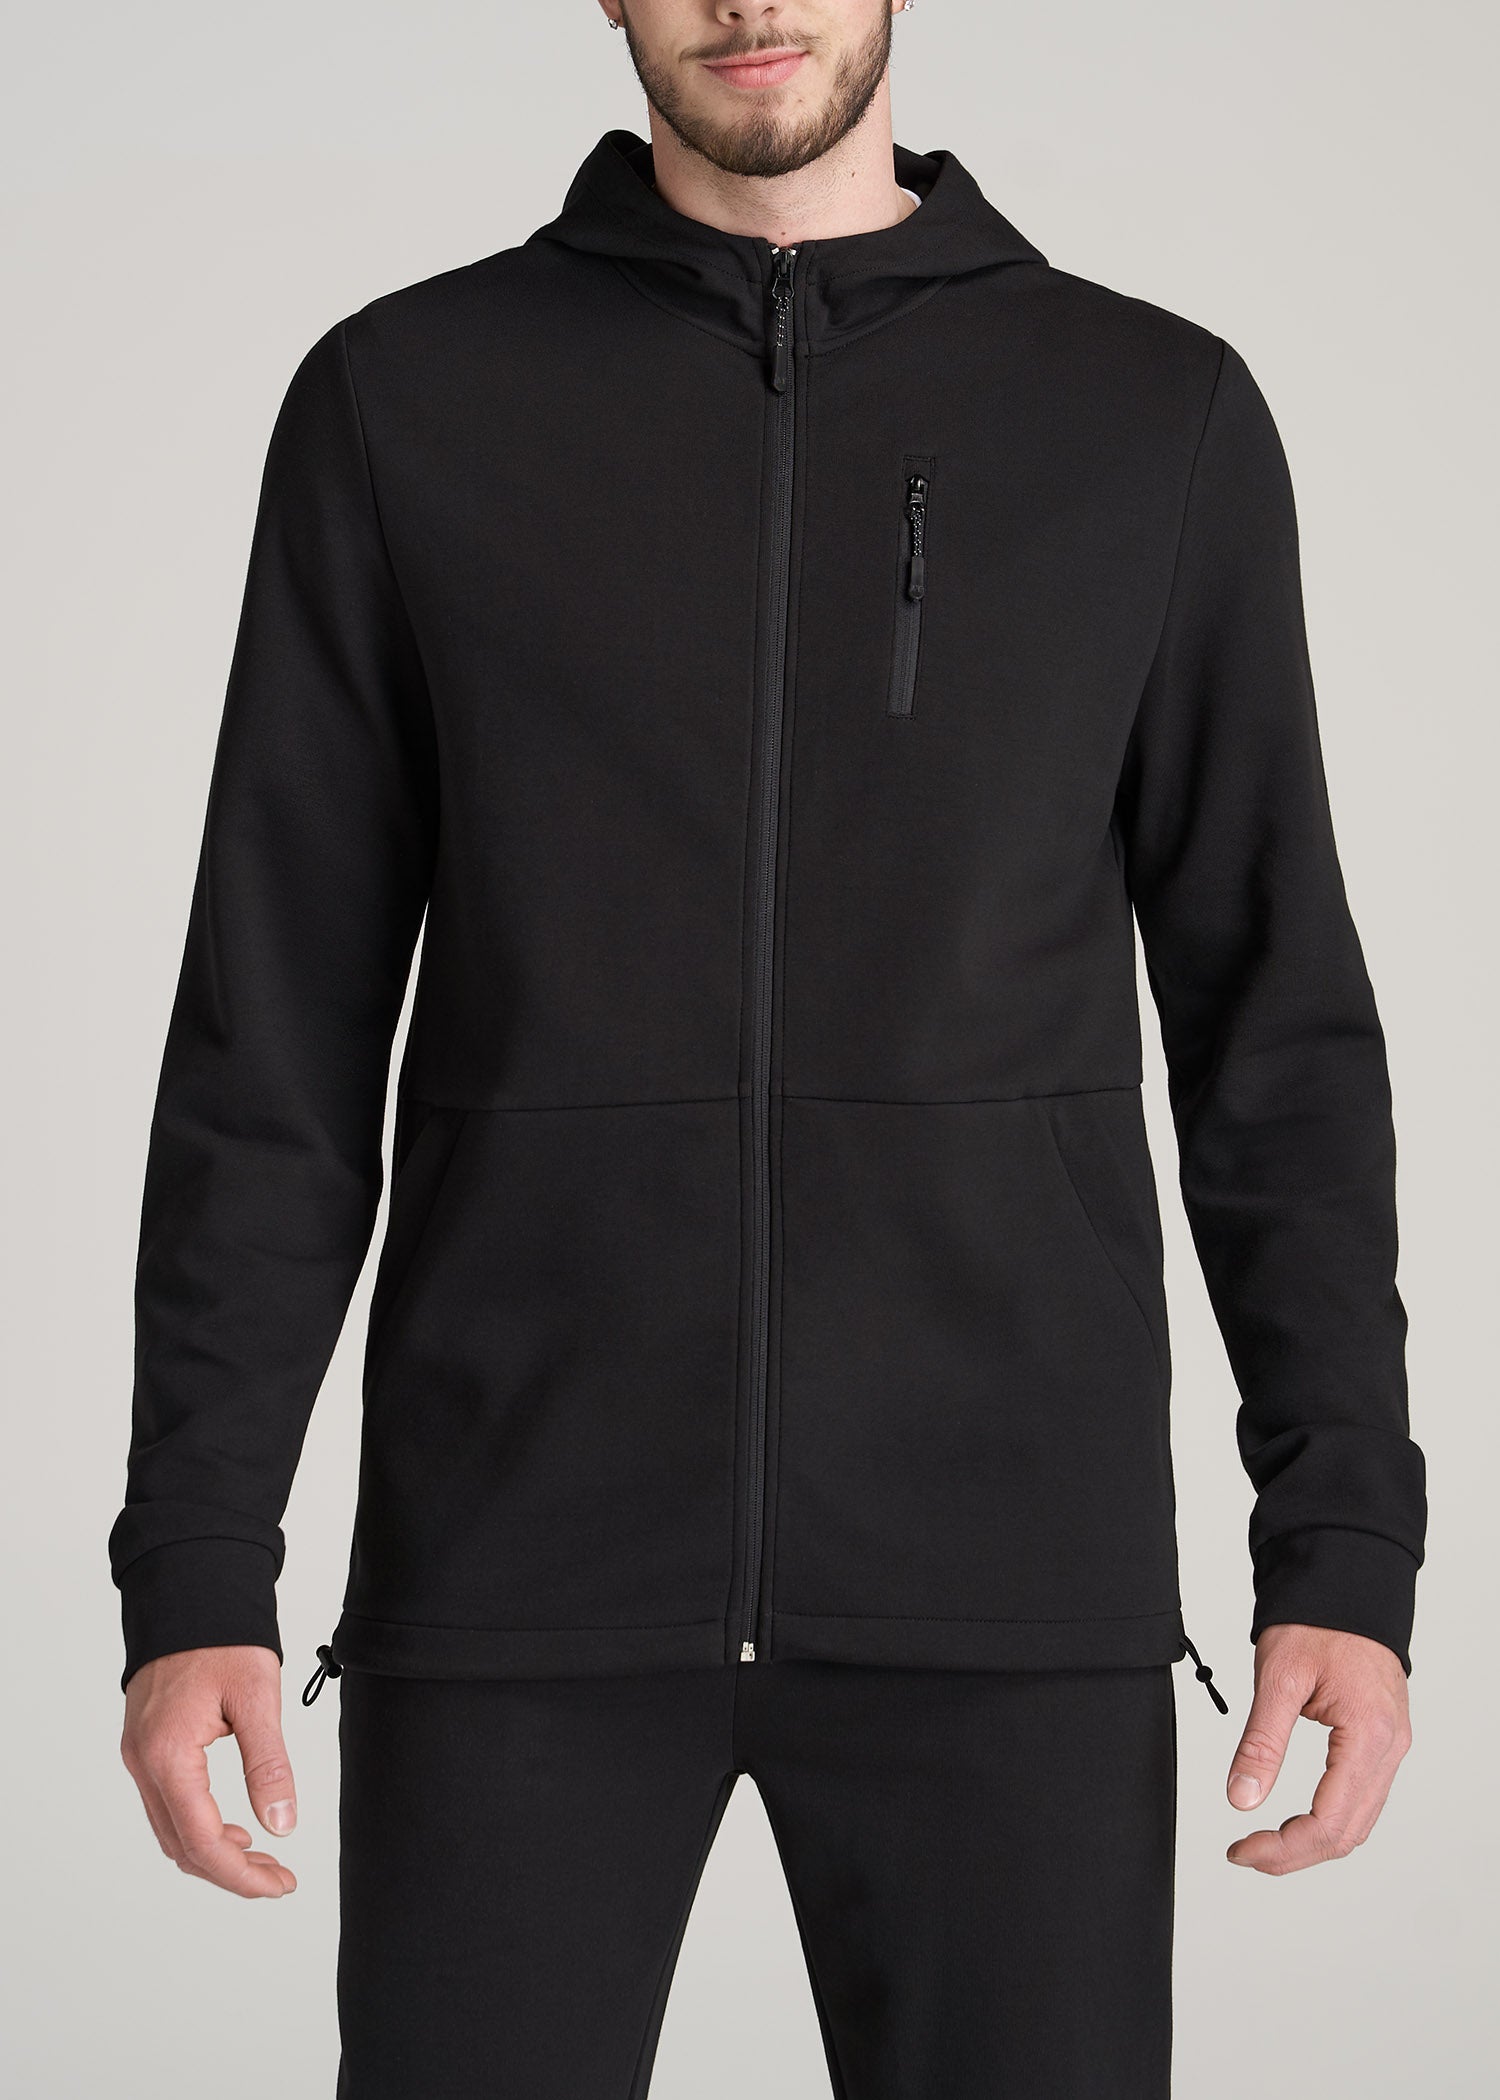       American-Tall-Men-Athleisure-Performance-Hooded-Track-Jacket-Black-front